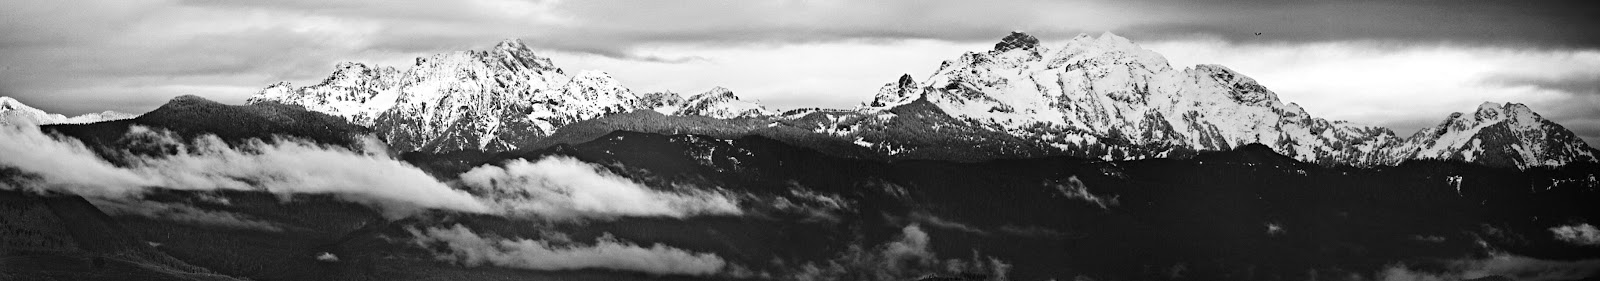 2011_12_16-local-mountains-pano-bw-high-contrast.jpg